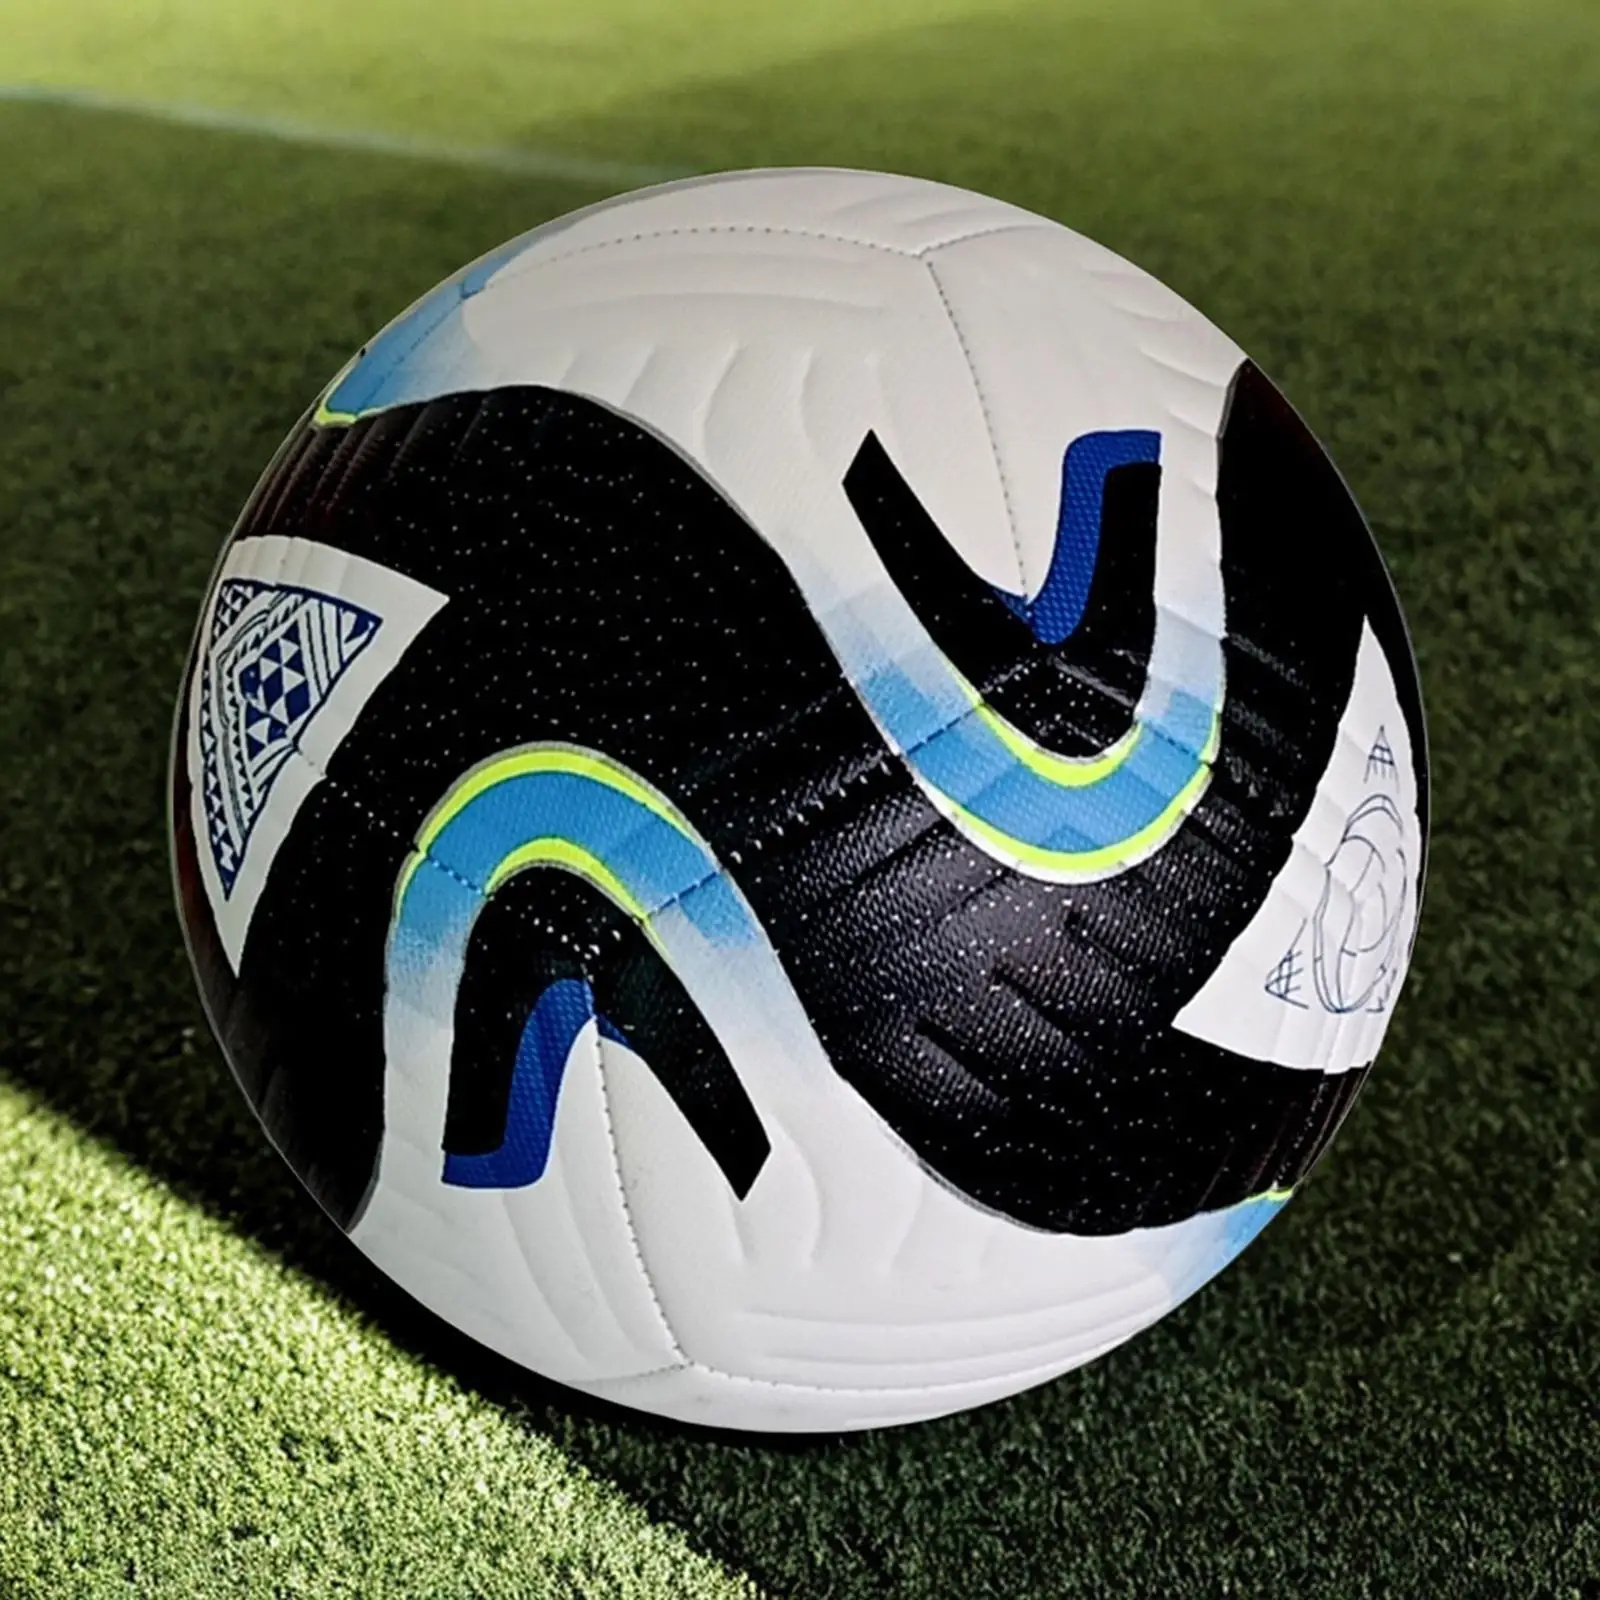 Soccer Ball Size 5 Seamless Stitching Football Leather Official Match Ball